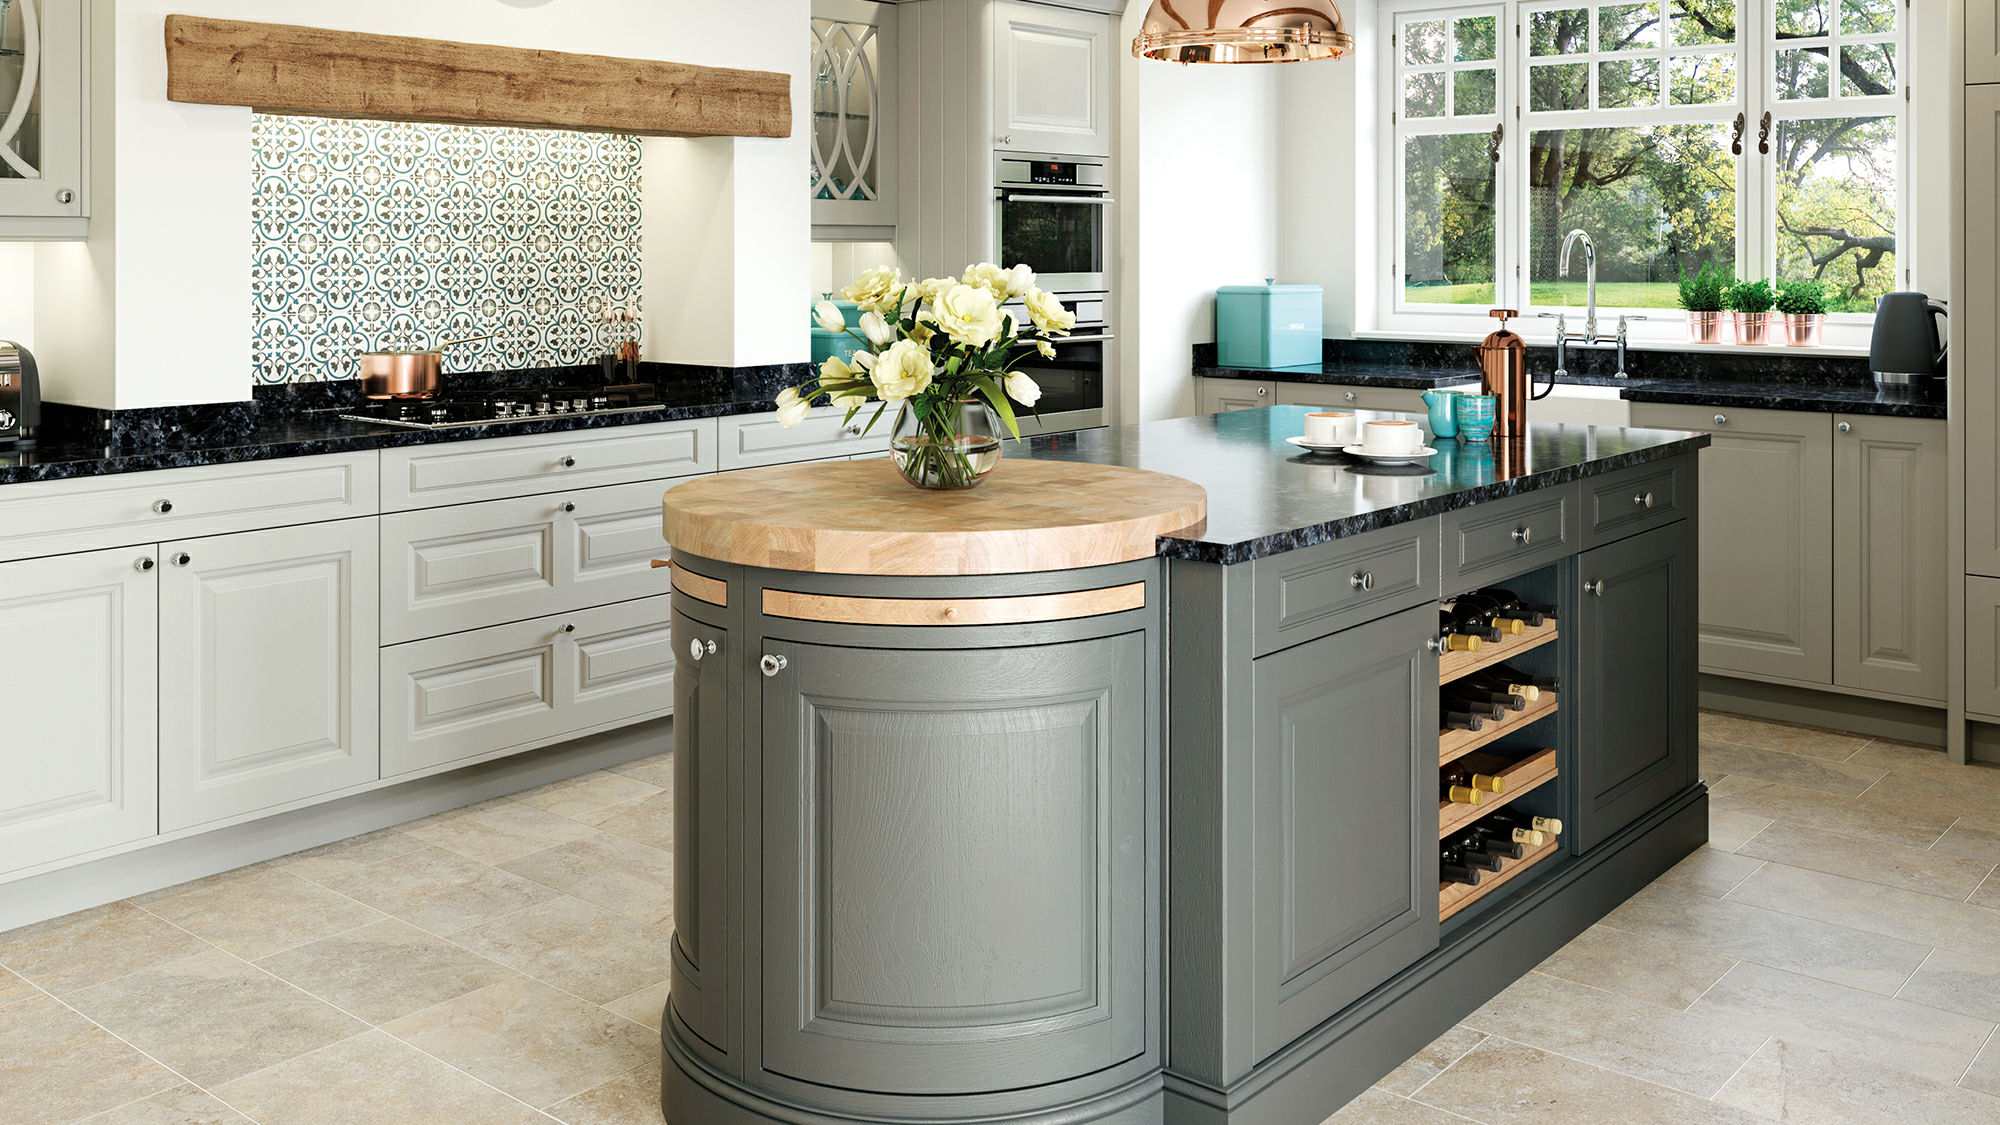 Jefferson solid wood dust grey kitchens featuring a classic design with a contemporary grey twist